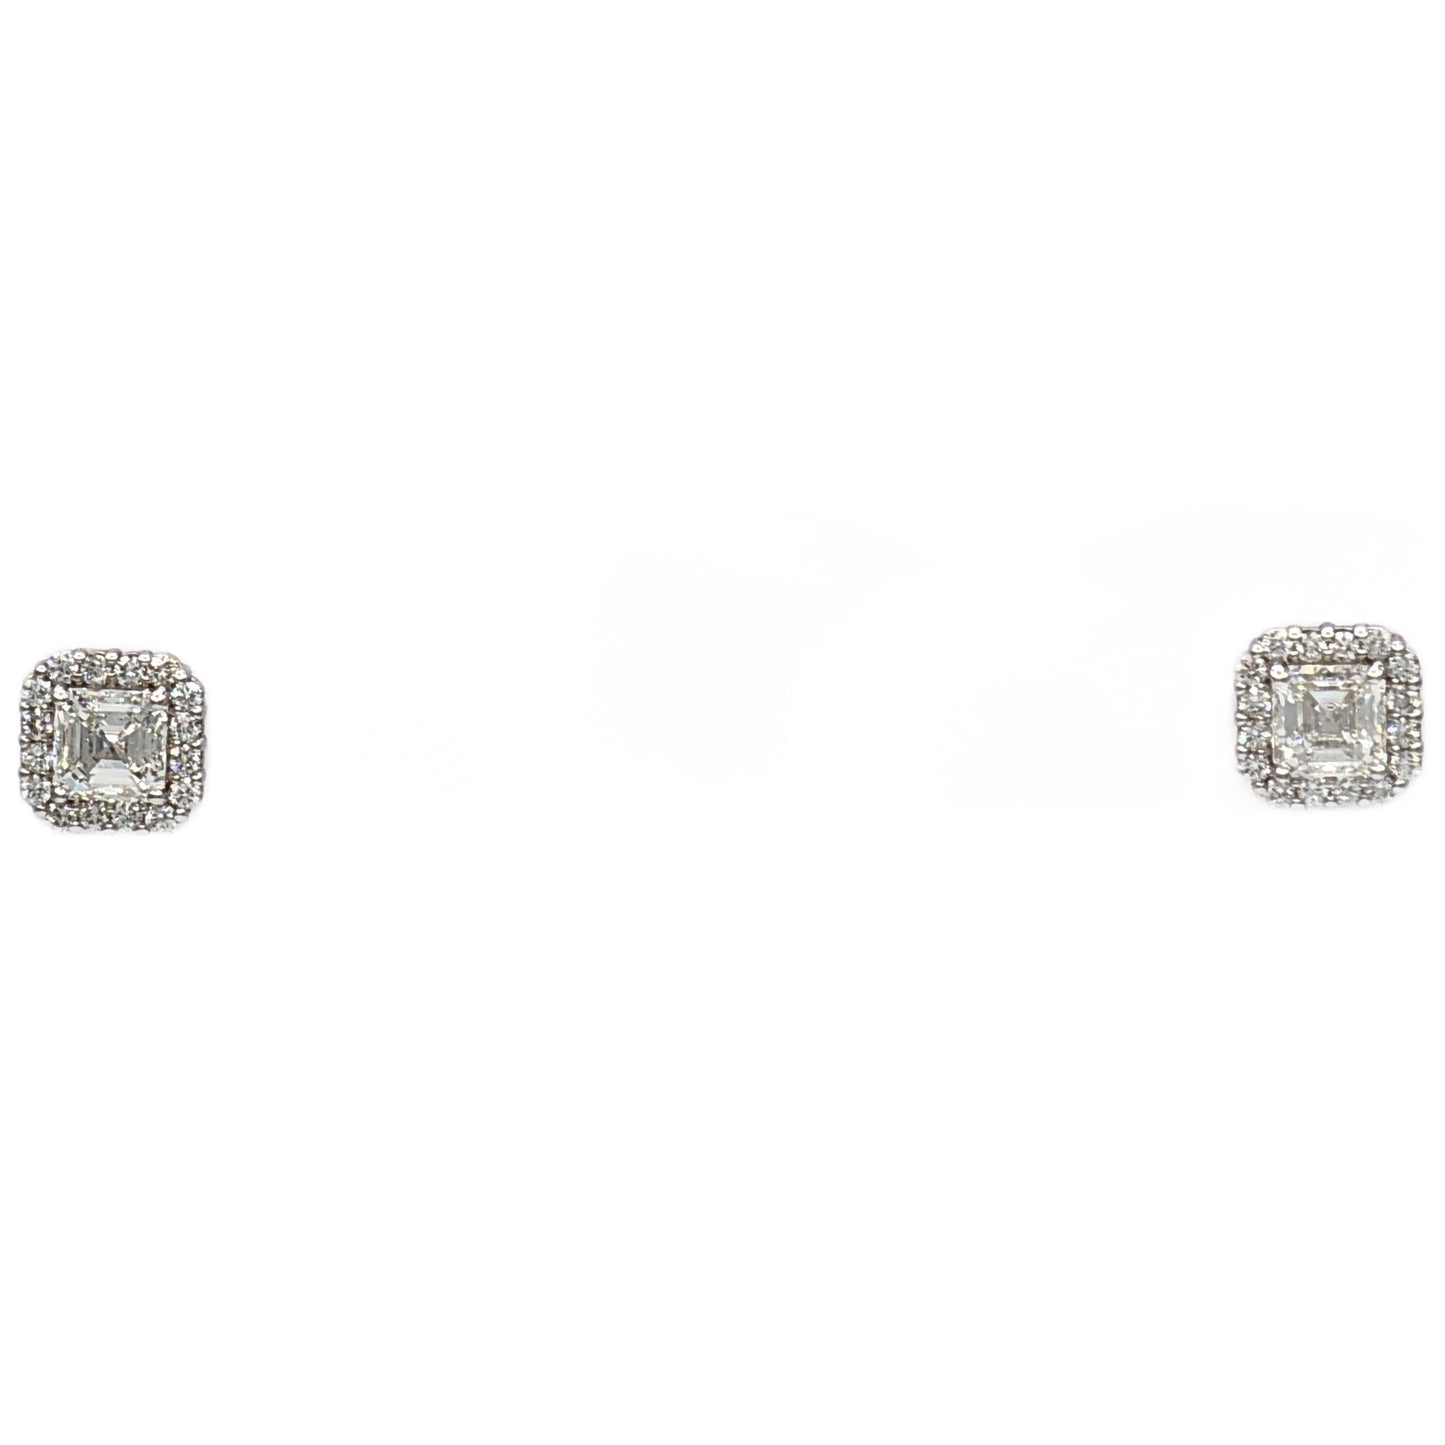 2=1.42 H/G Color, VVS1/IF Clarity Asscher Cut and 32=0.32 Diamond Stud Earrings in 18K White Gold, GIA Report